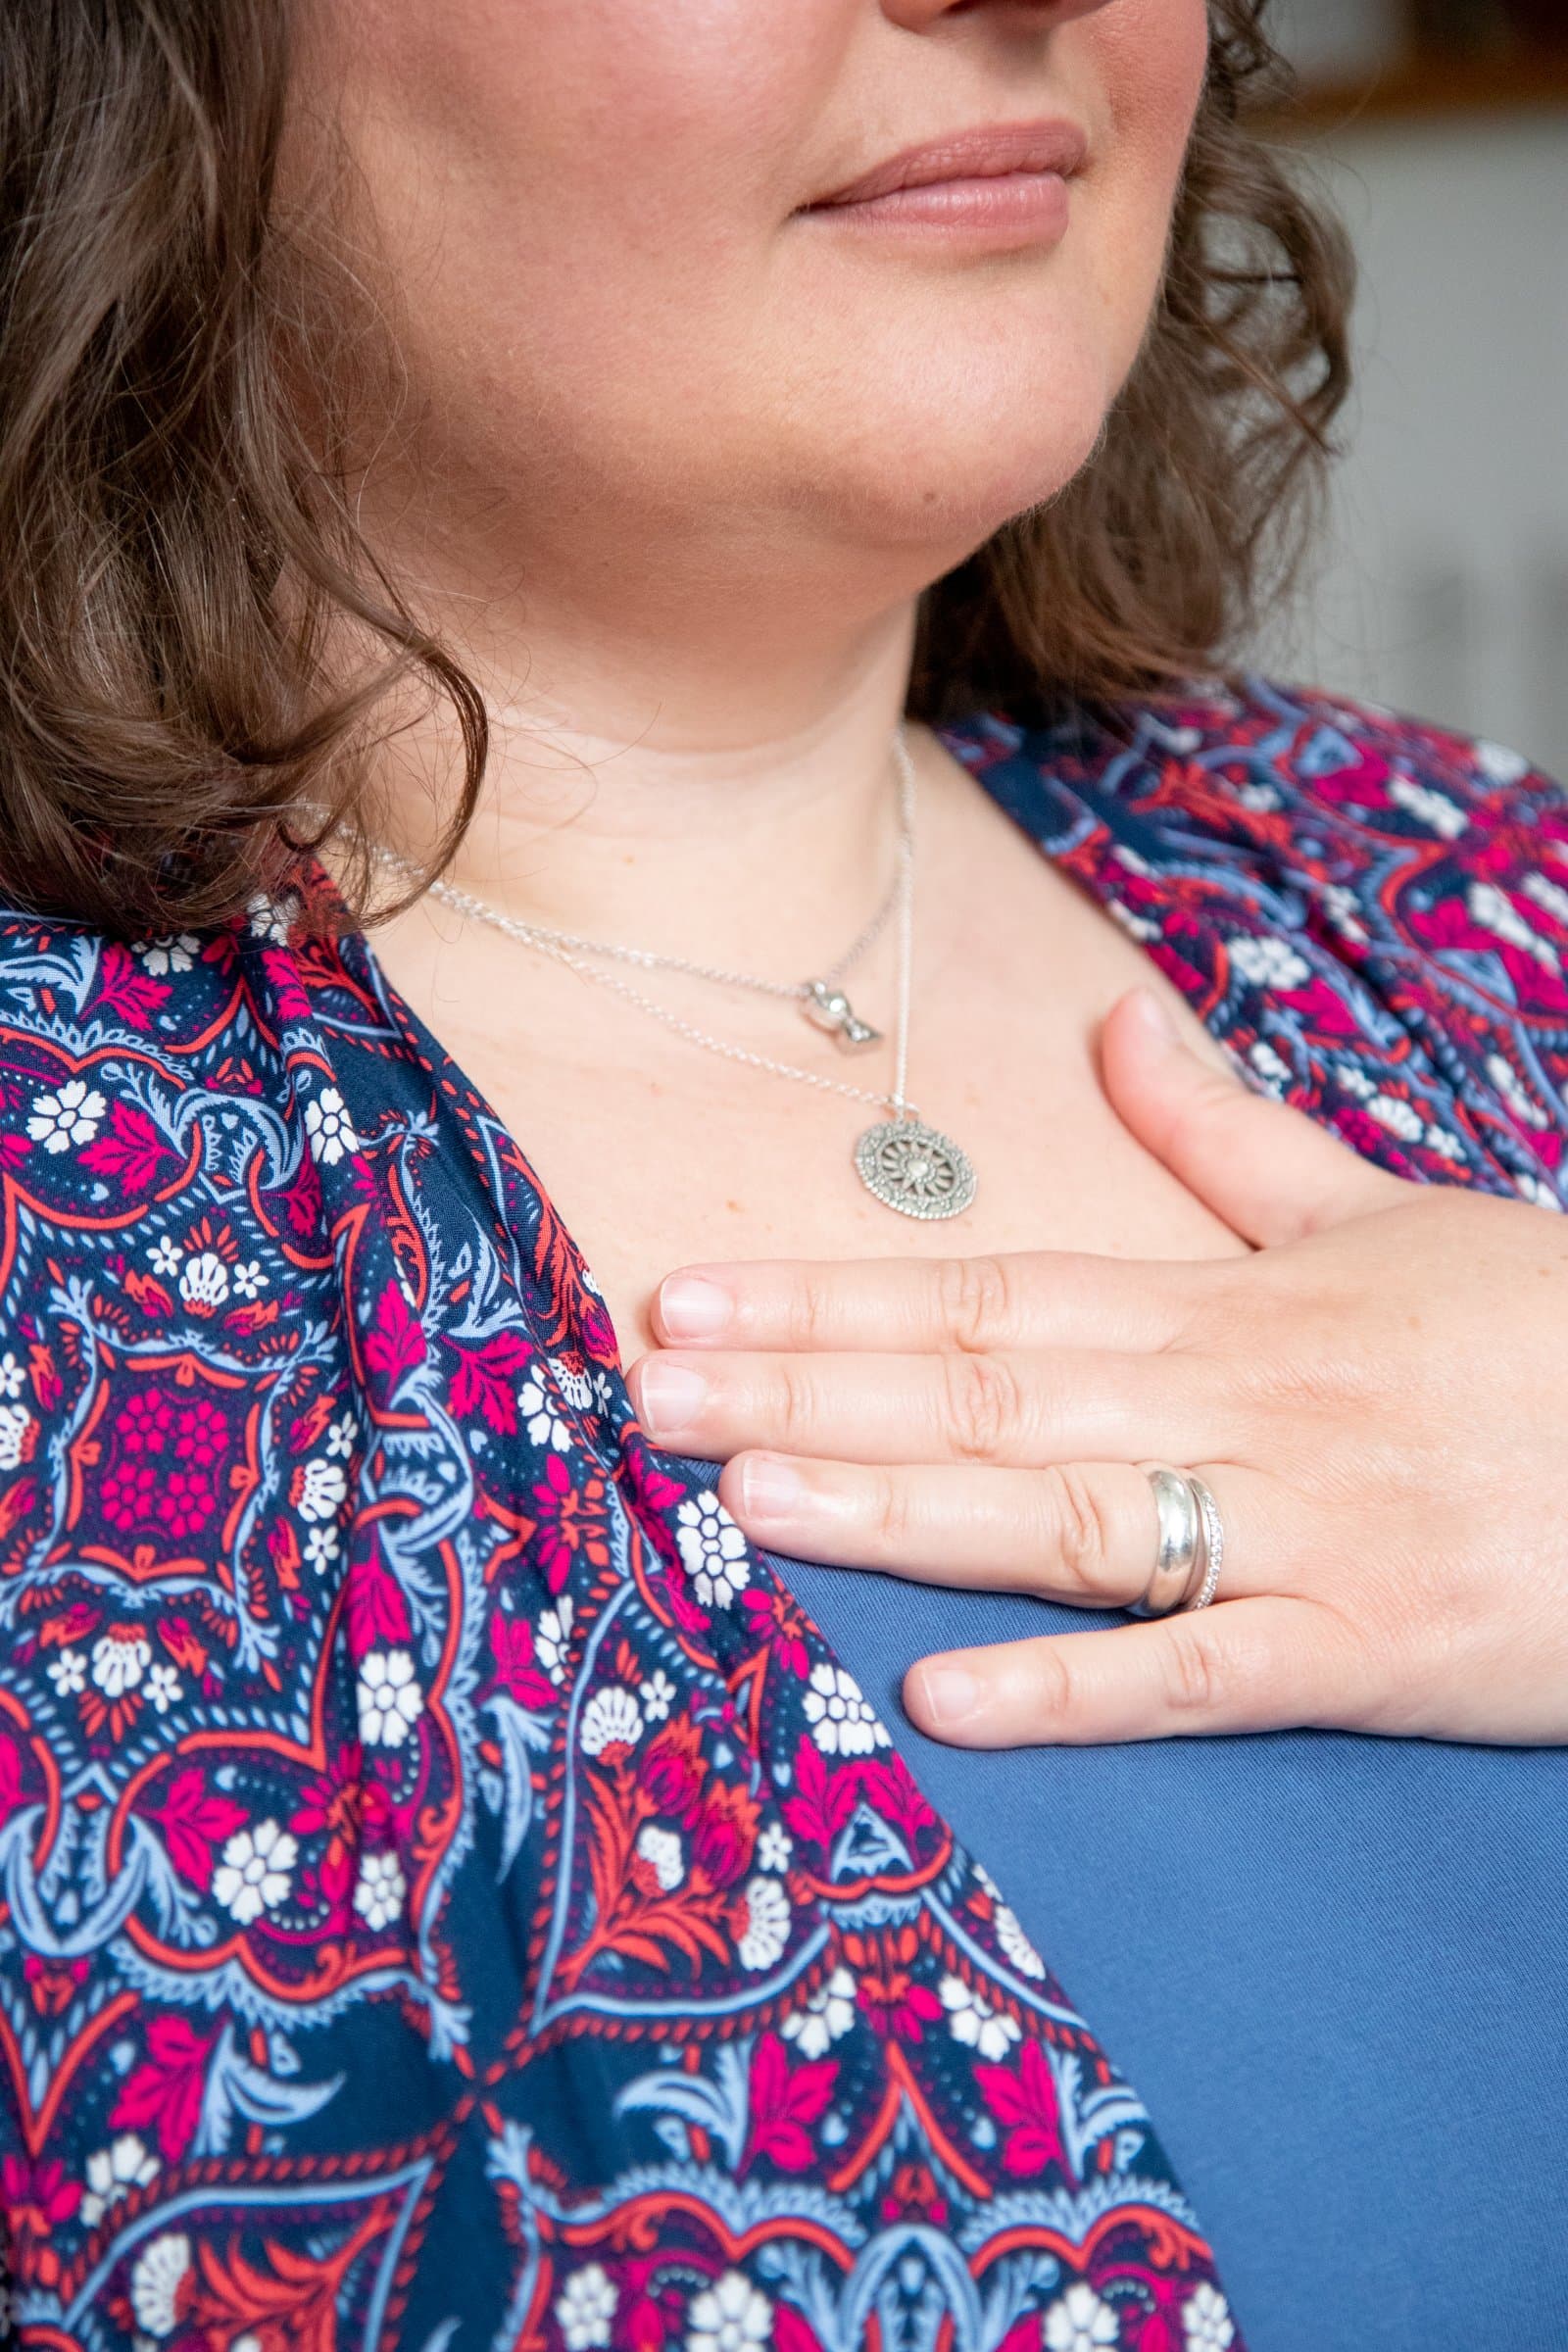 Close up of a woman's torso. She has her hand on her chest as she meditates.